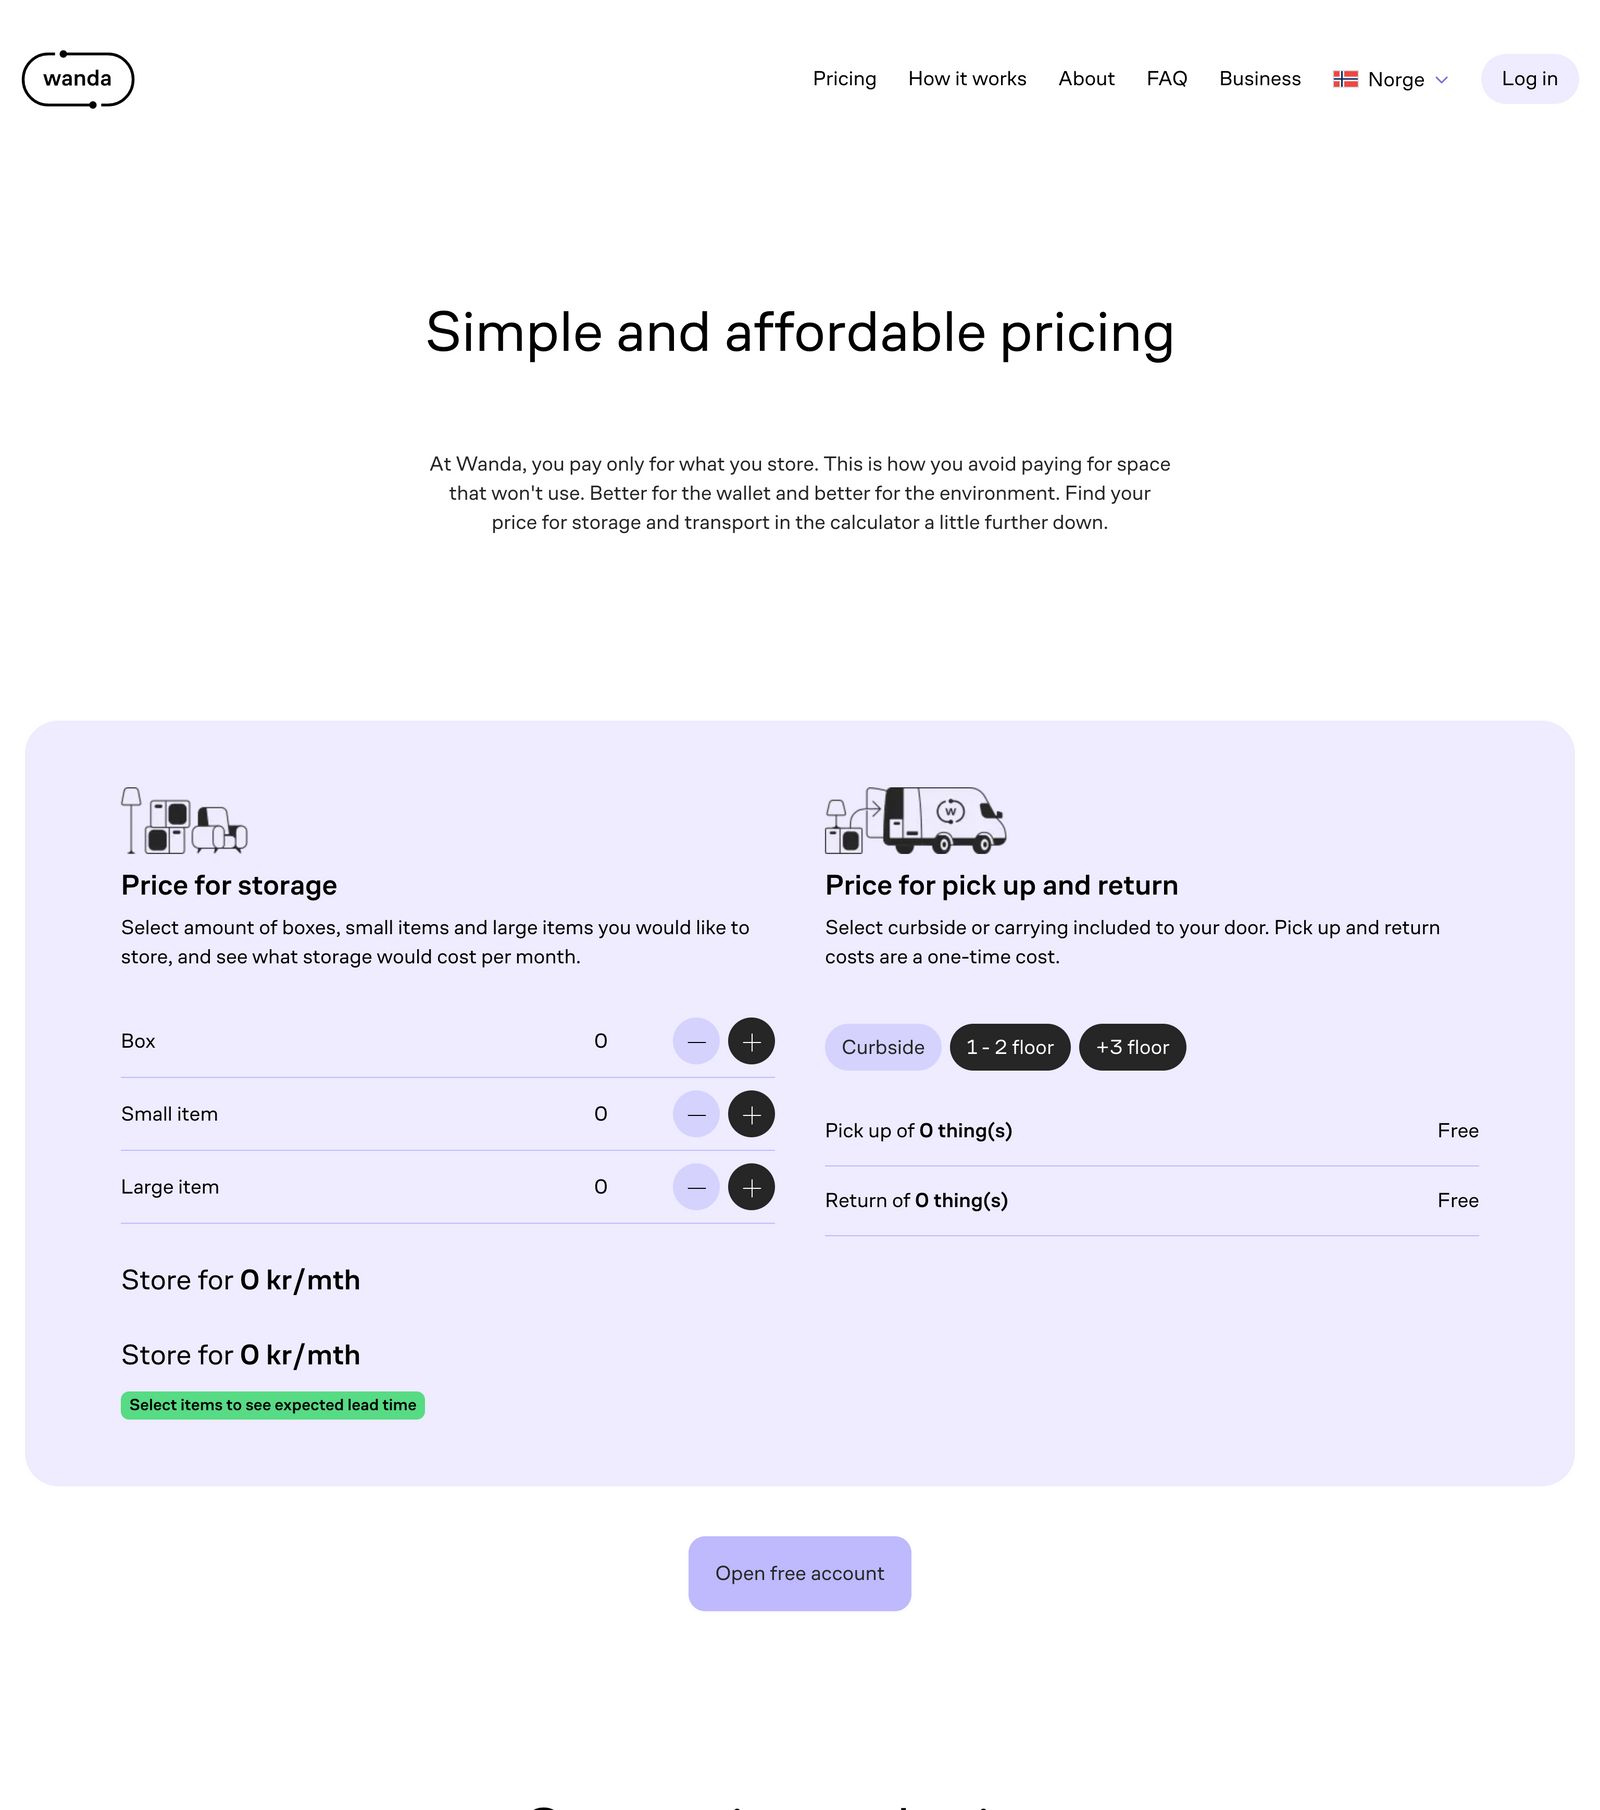 /articles/pricing-page-inspiration/pricing-page-design-example-7.jpg)_Pricing page example from Wanda